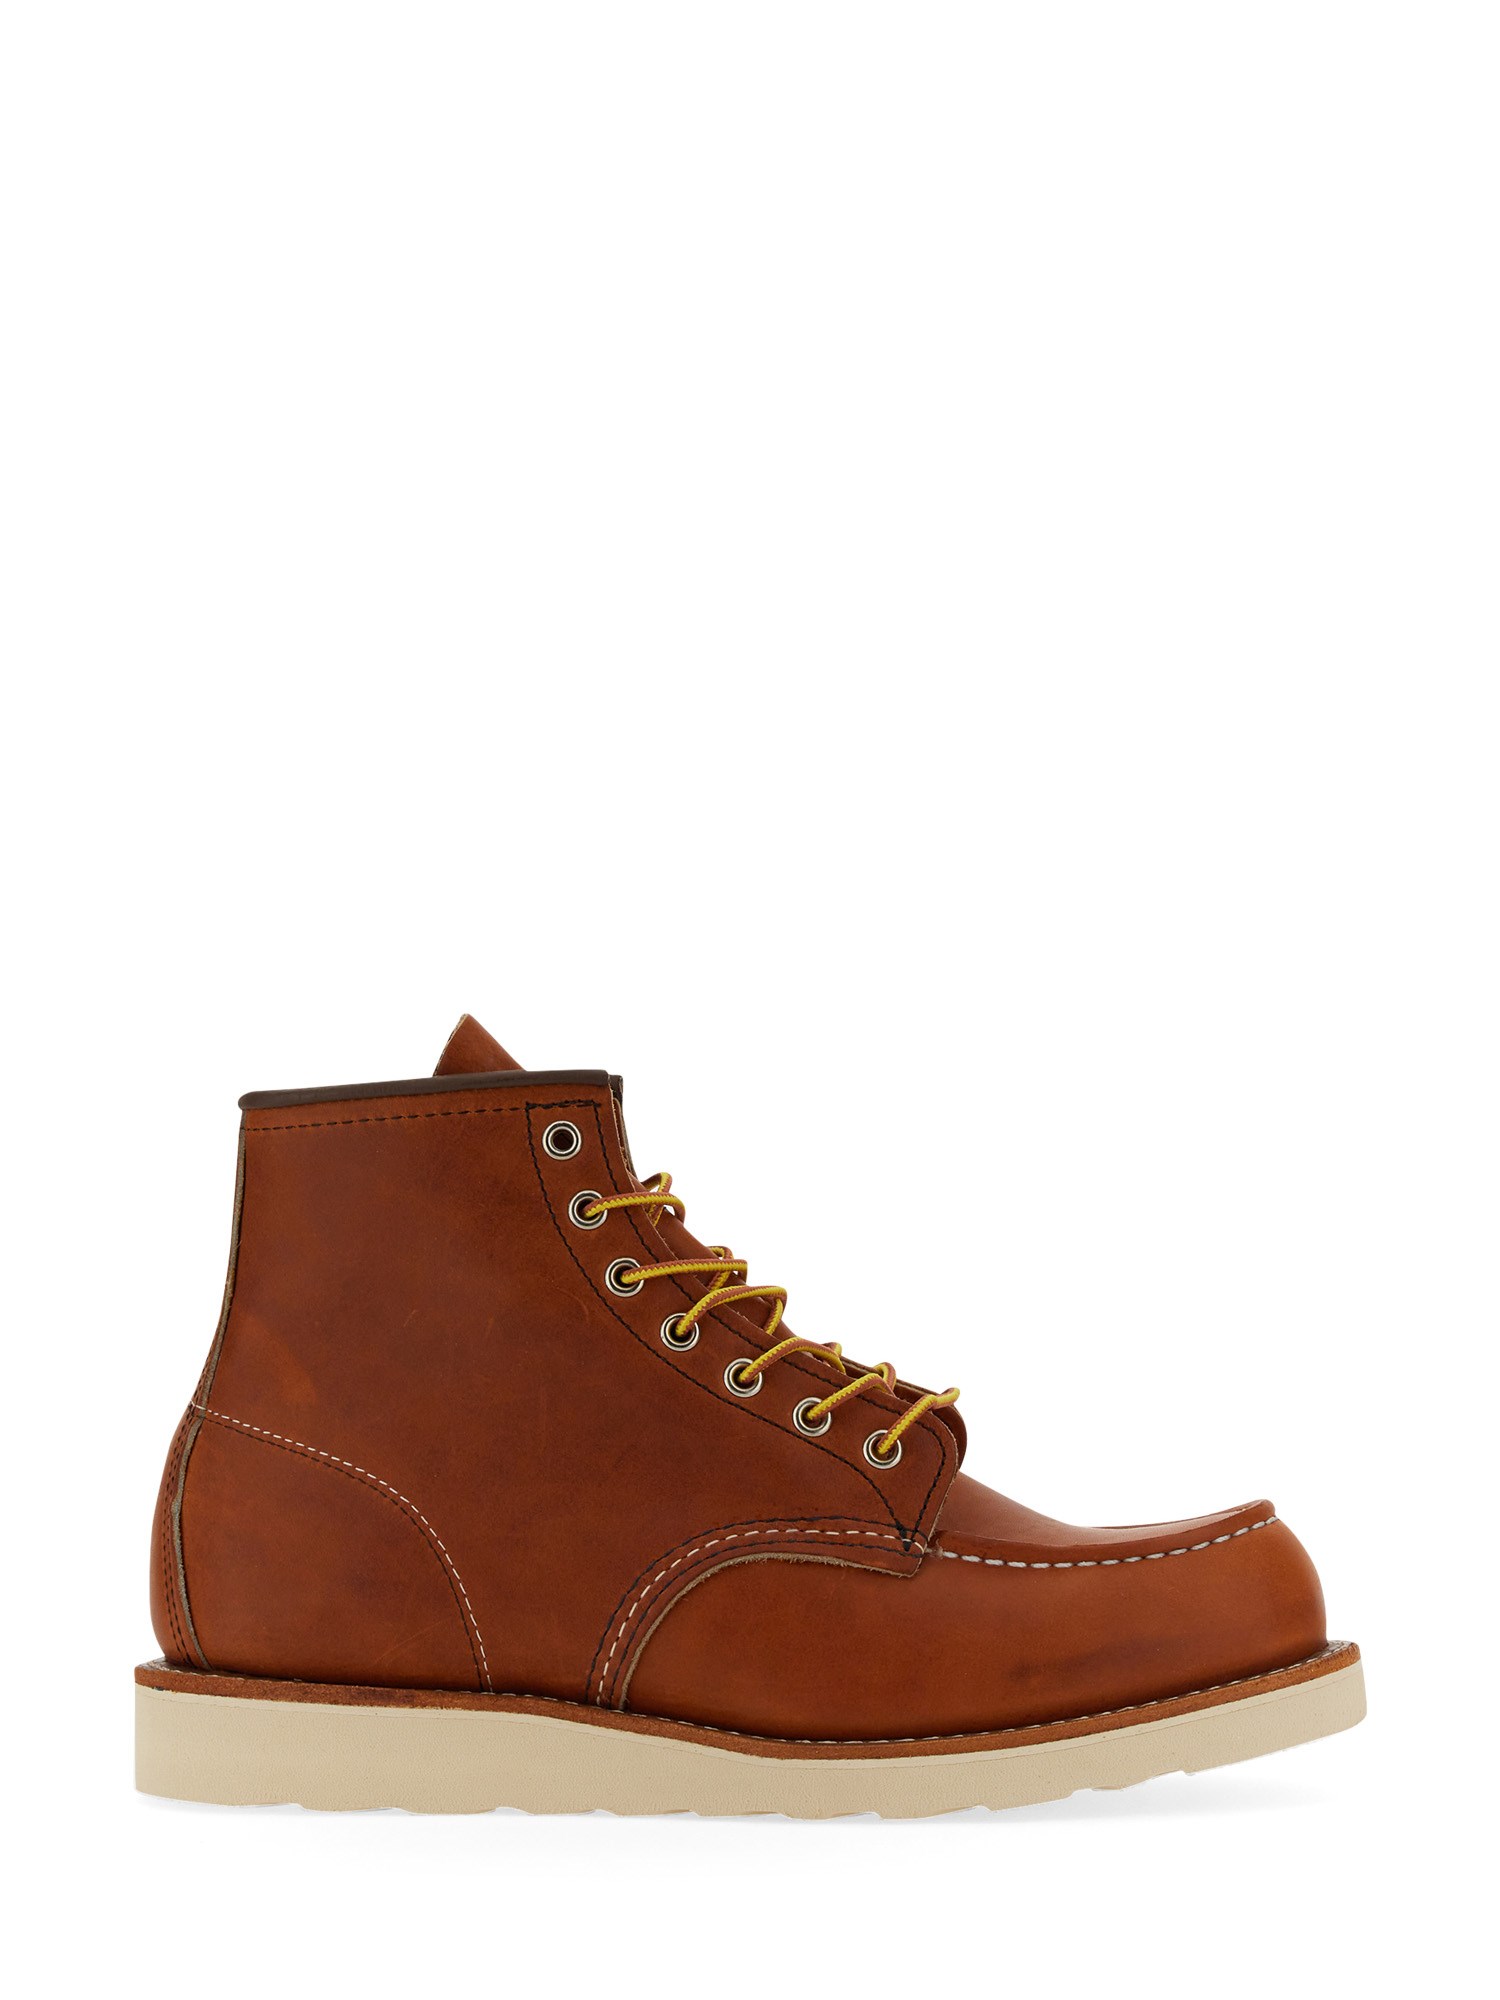 red wing moc toe boot